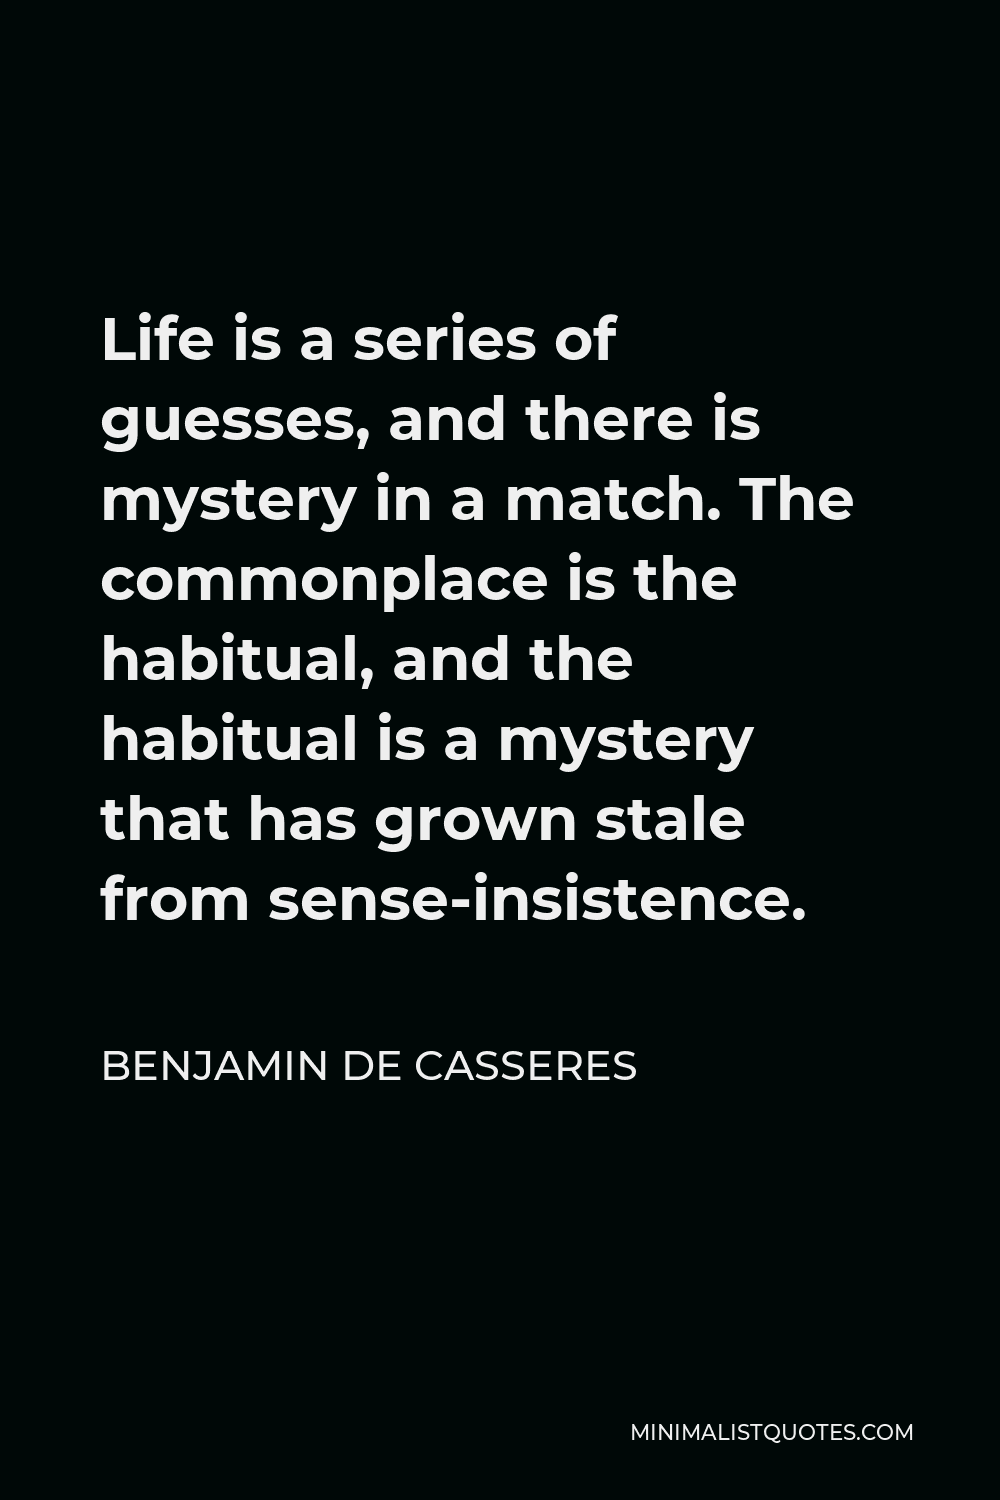 Benjamin De Casseres Quote - Life is a series of guesses, and there is mystery in a match. The commonplace is the habitual, and the habitual is a mystery that has grown stale from sense-insistence.